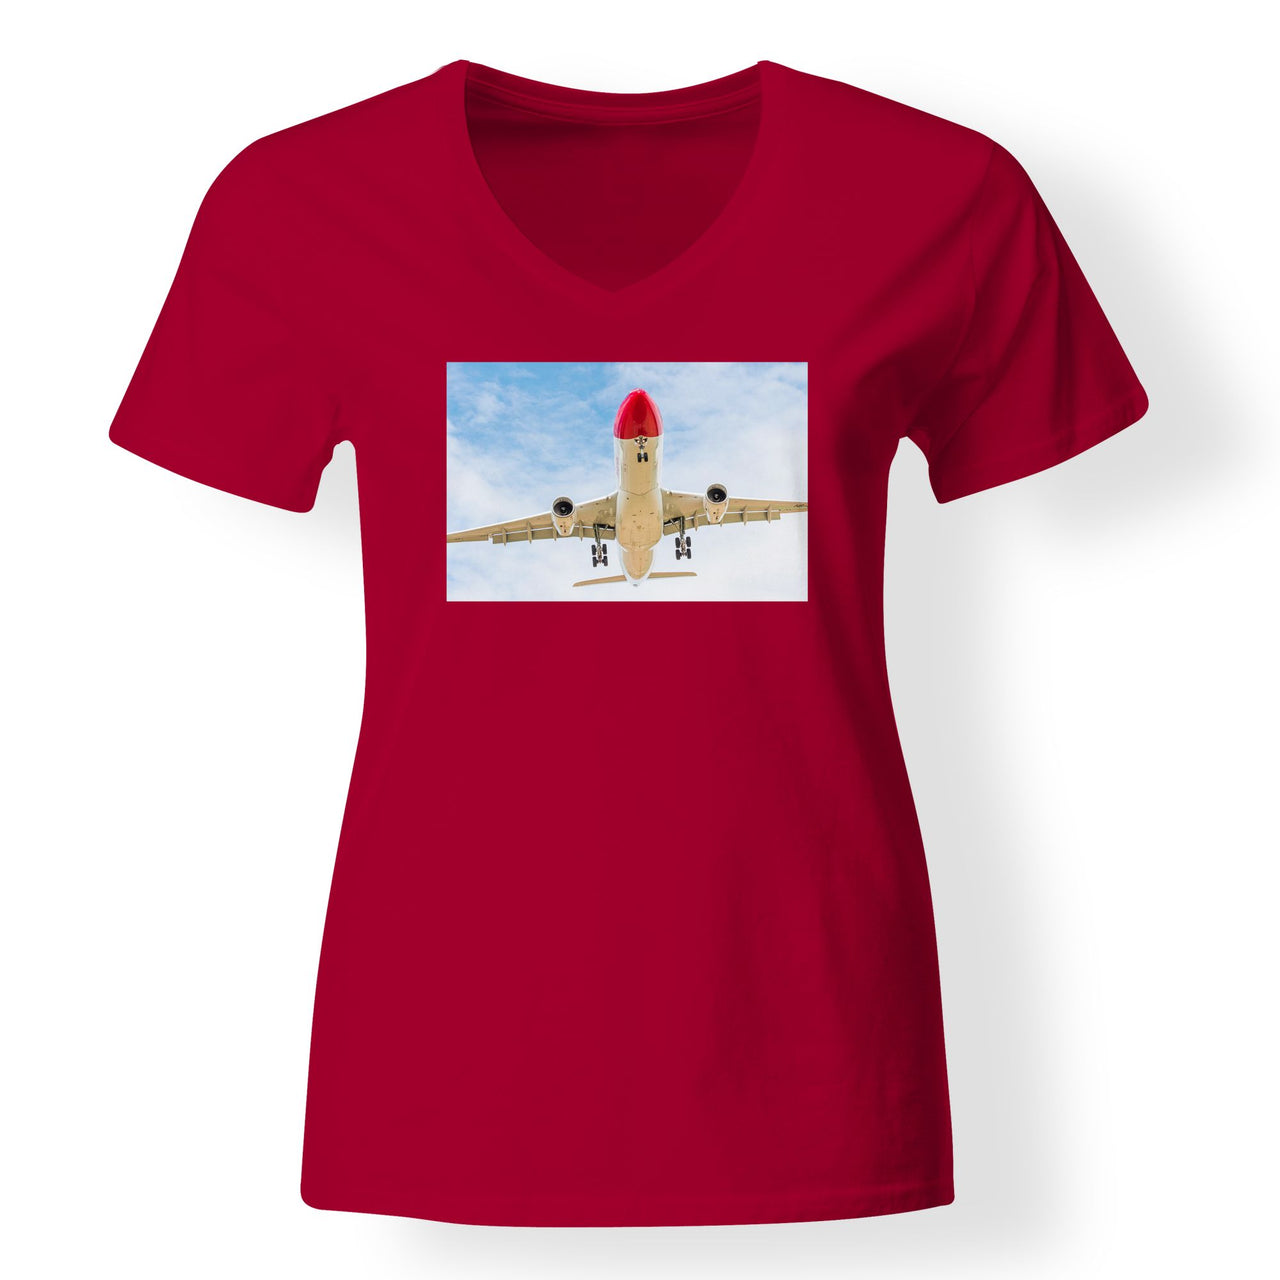 Beautiful Airbus A330 on Approach Designed V-Neck T-Shirts